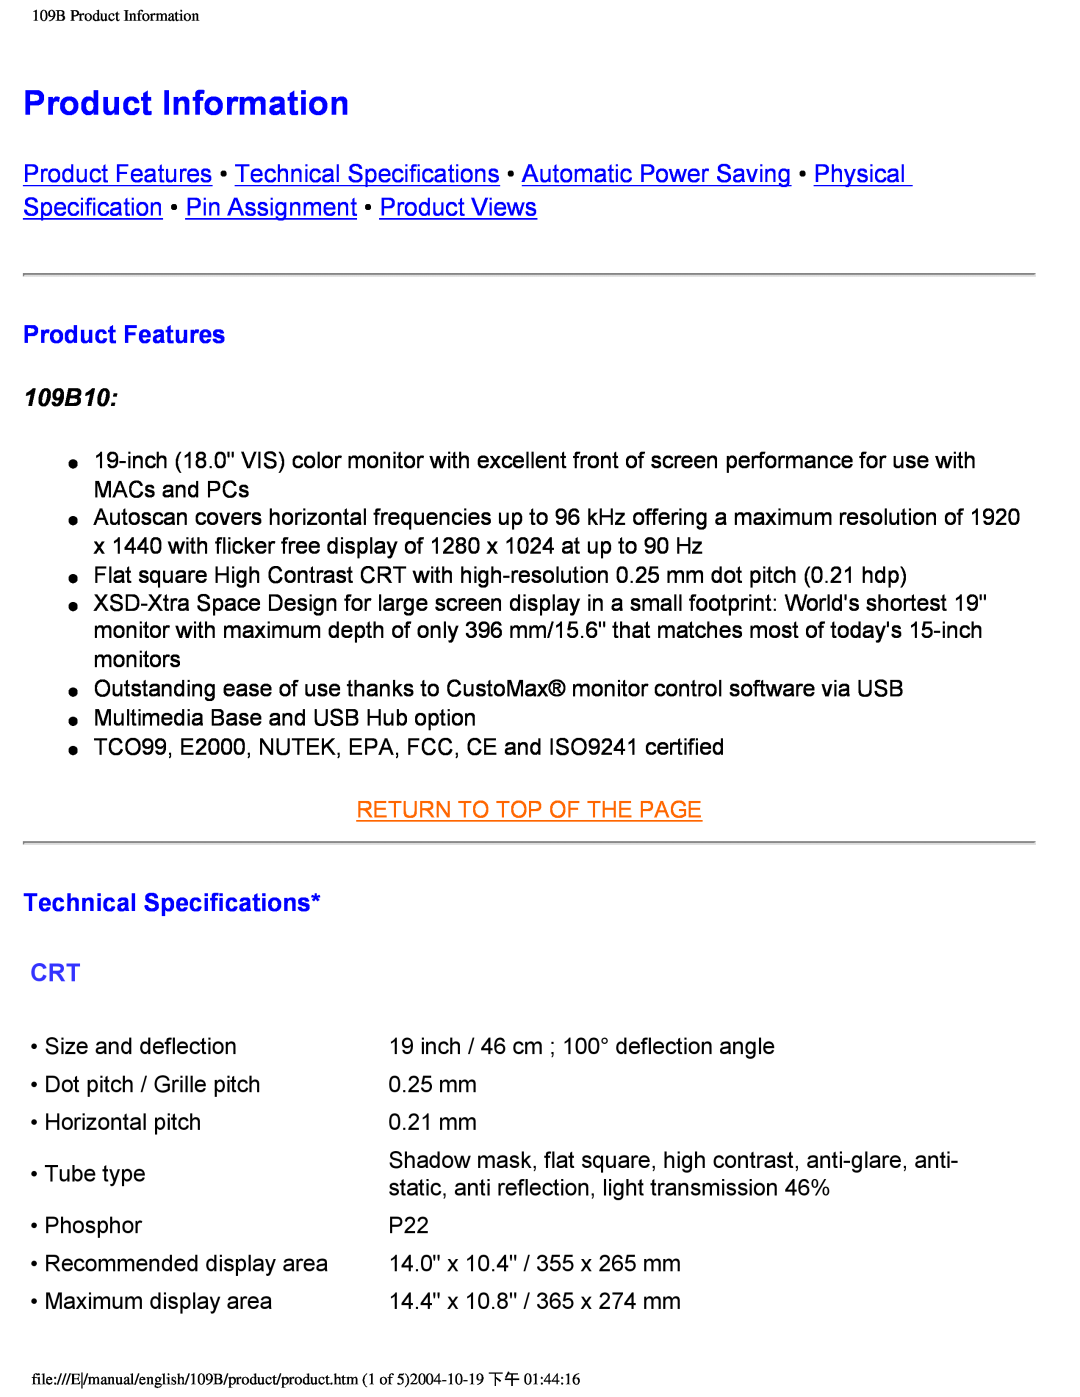 Philips user manual Product Information, Product Features, 109B10, Technical Specifications, Return To Top Of The Page 